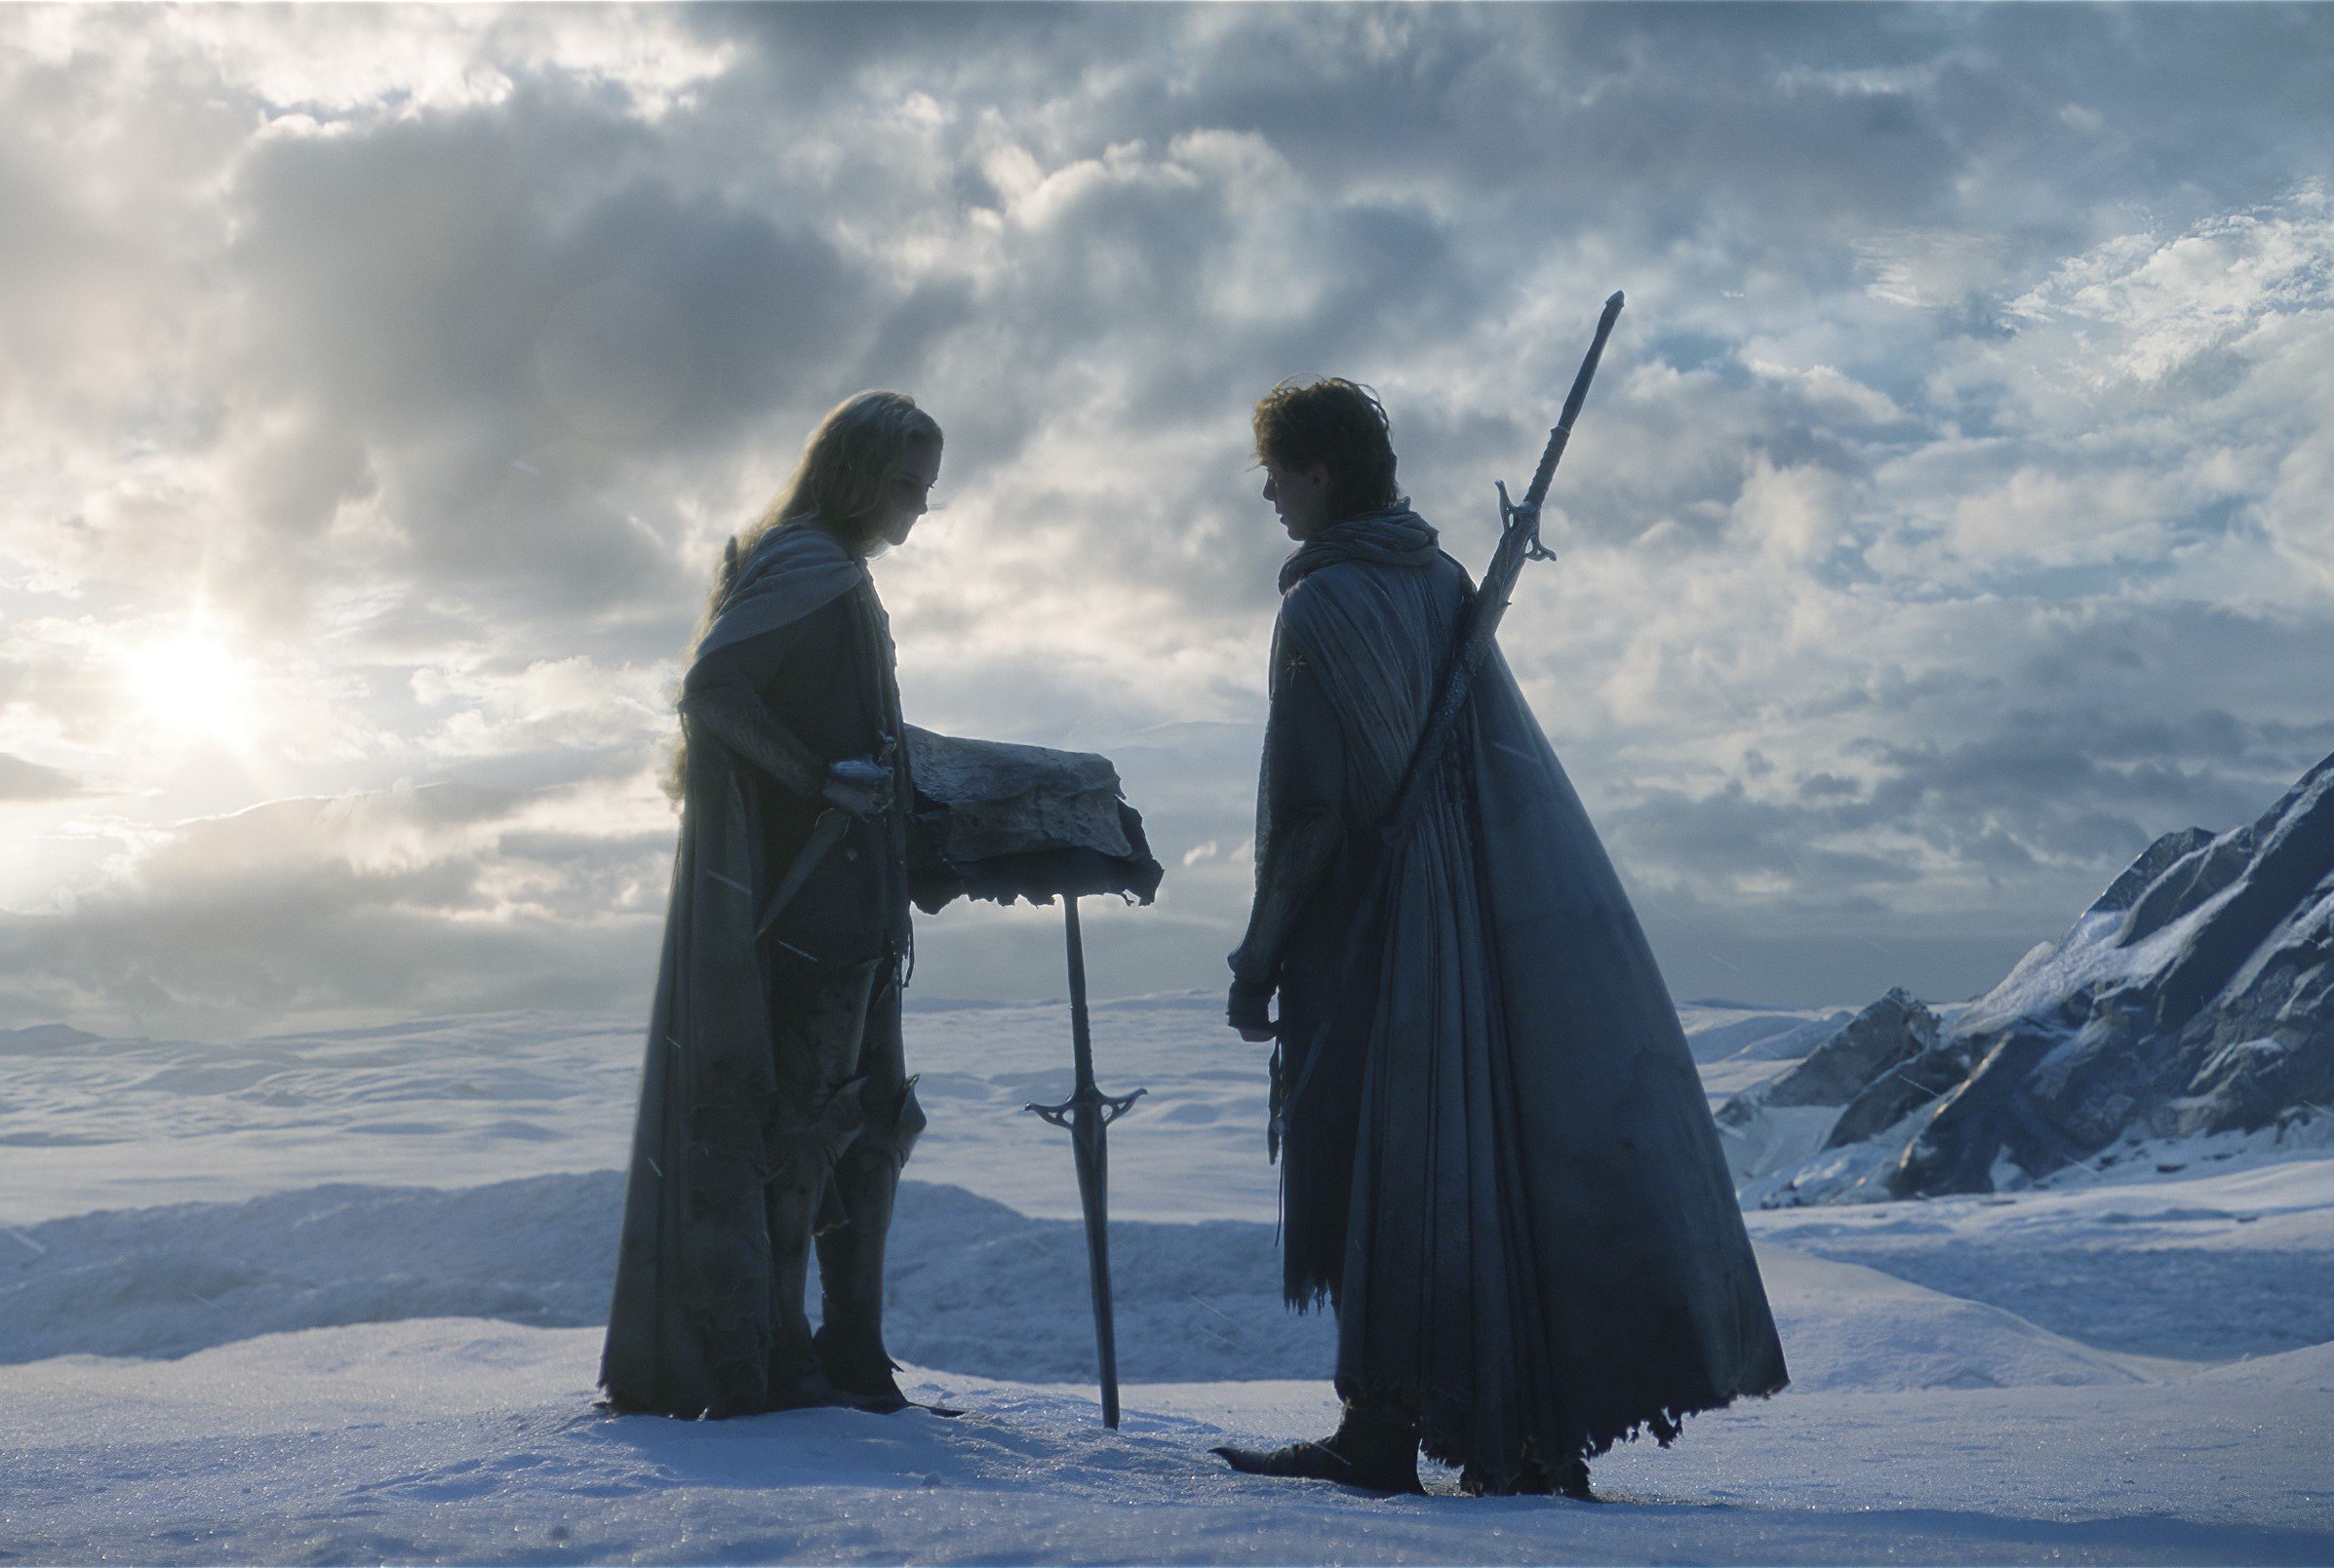 Morfydd Clark and Fabian McCallum in 'The Lord of the Rings: The Rings of Power,' which is set when the Second Age took place. The two are standing amid a snowy landscape. There's a sword sticking out of the ground.